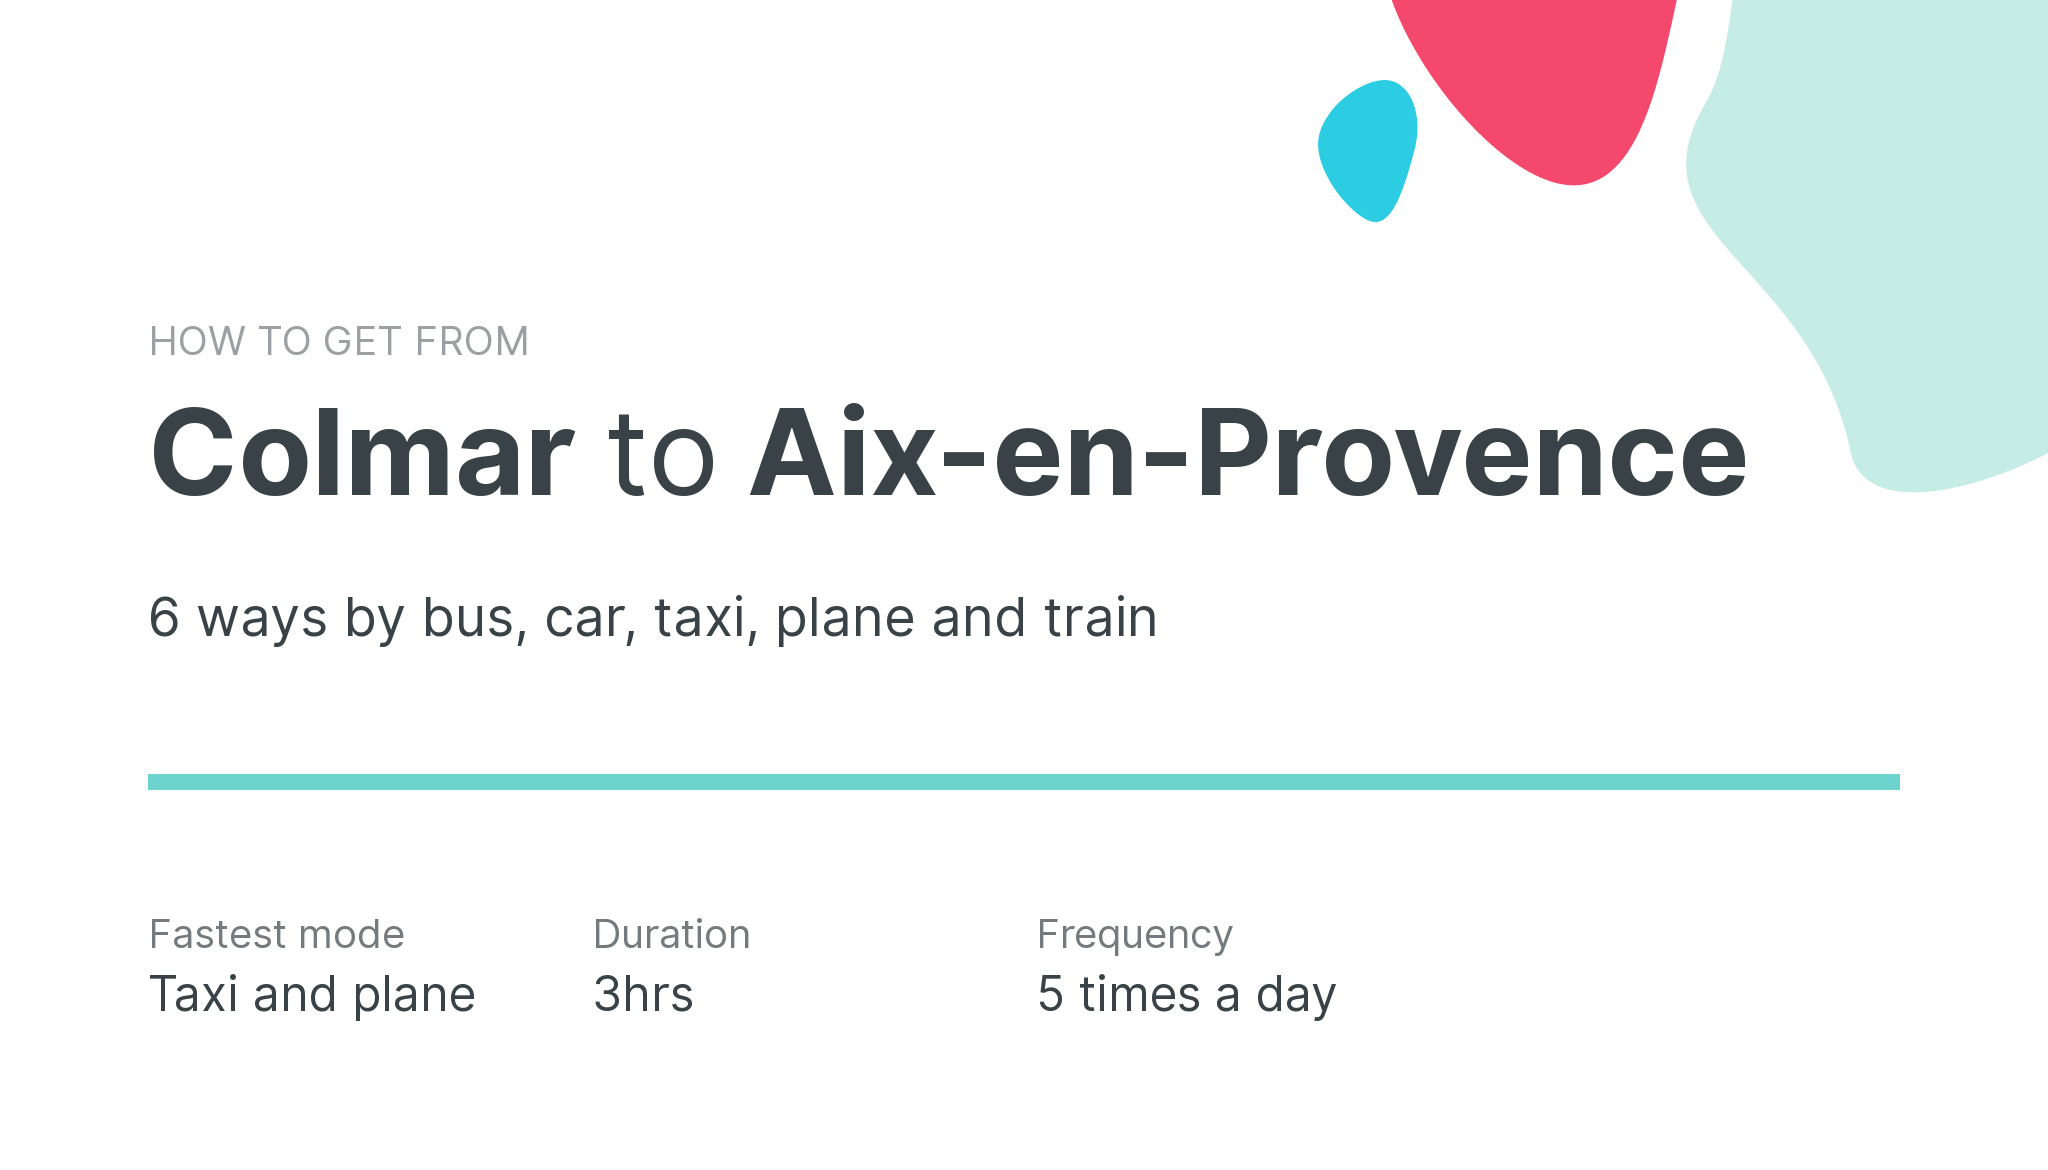 How do I get from Colmar to Aix-en-Provence